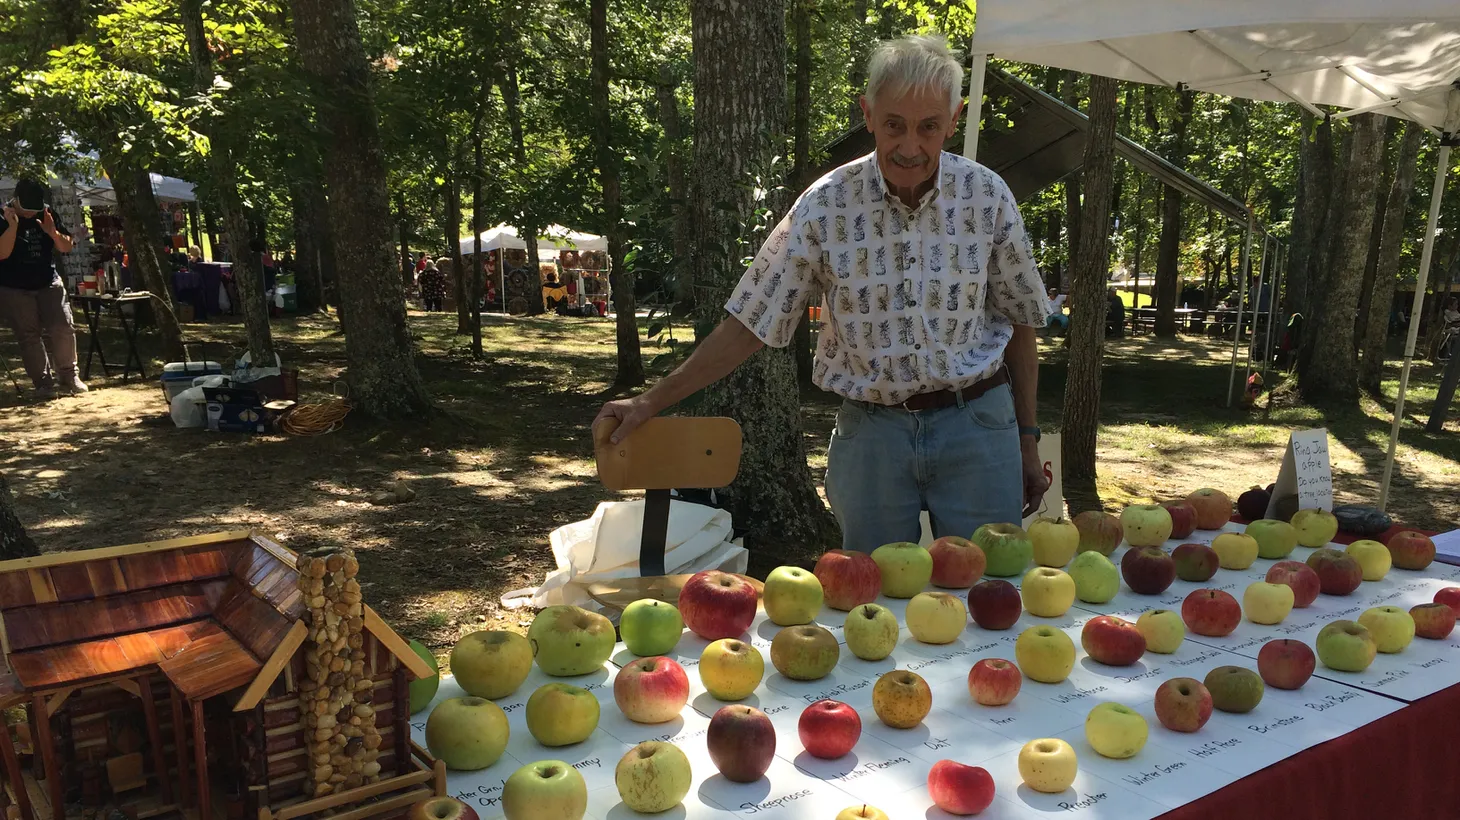 Tom Brown and his apple display at the Mountaineer Folk Festival in Fall Creek Falls State Park, TN.